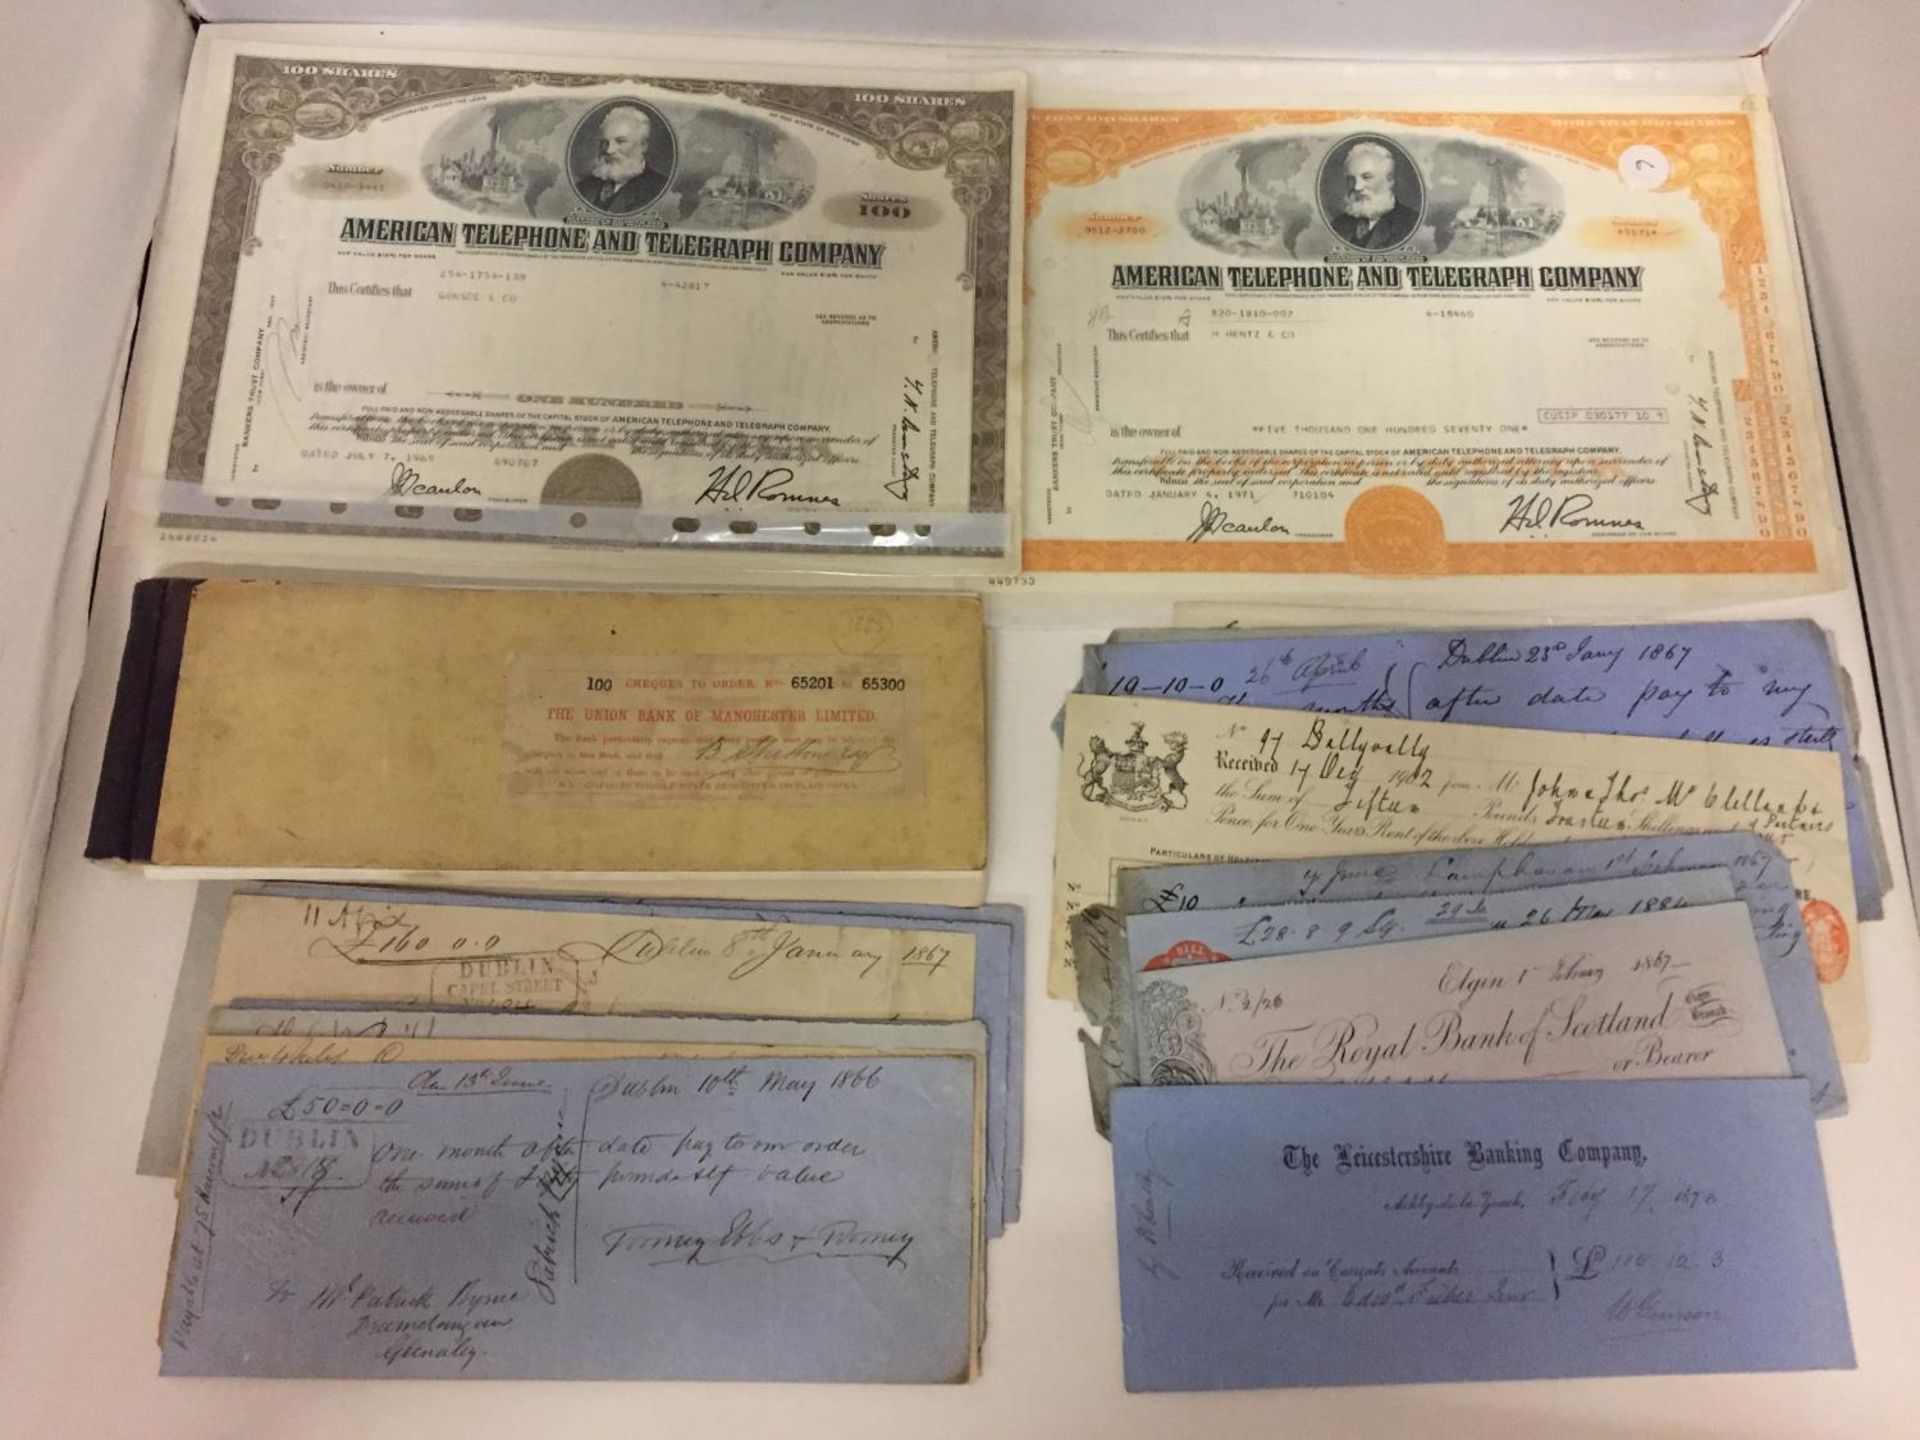 A QUANTITY OF BANKERS DRAUGHTS, CHEQUE STUBS 1860'S - 1910 AND TWO SHARE CERIFICATES NEW YORK 1969 - Image 2 of 12